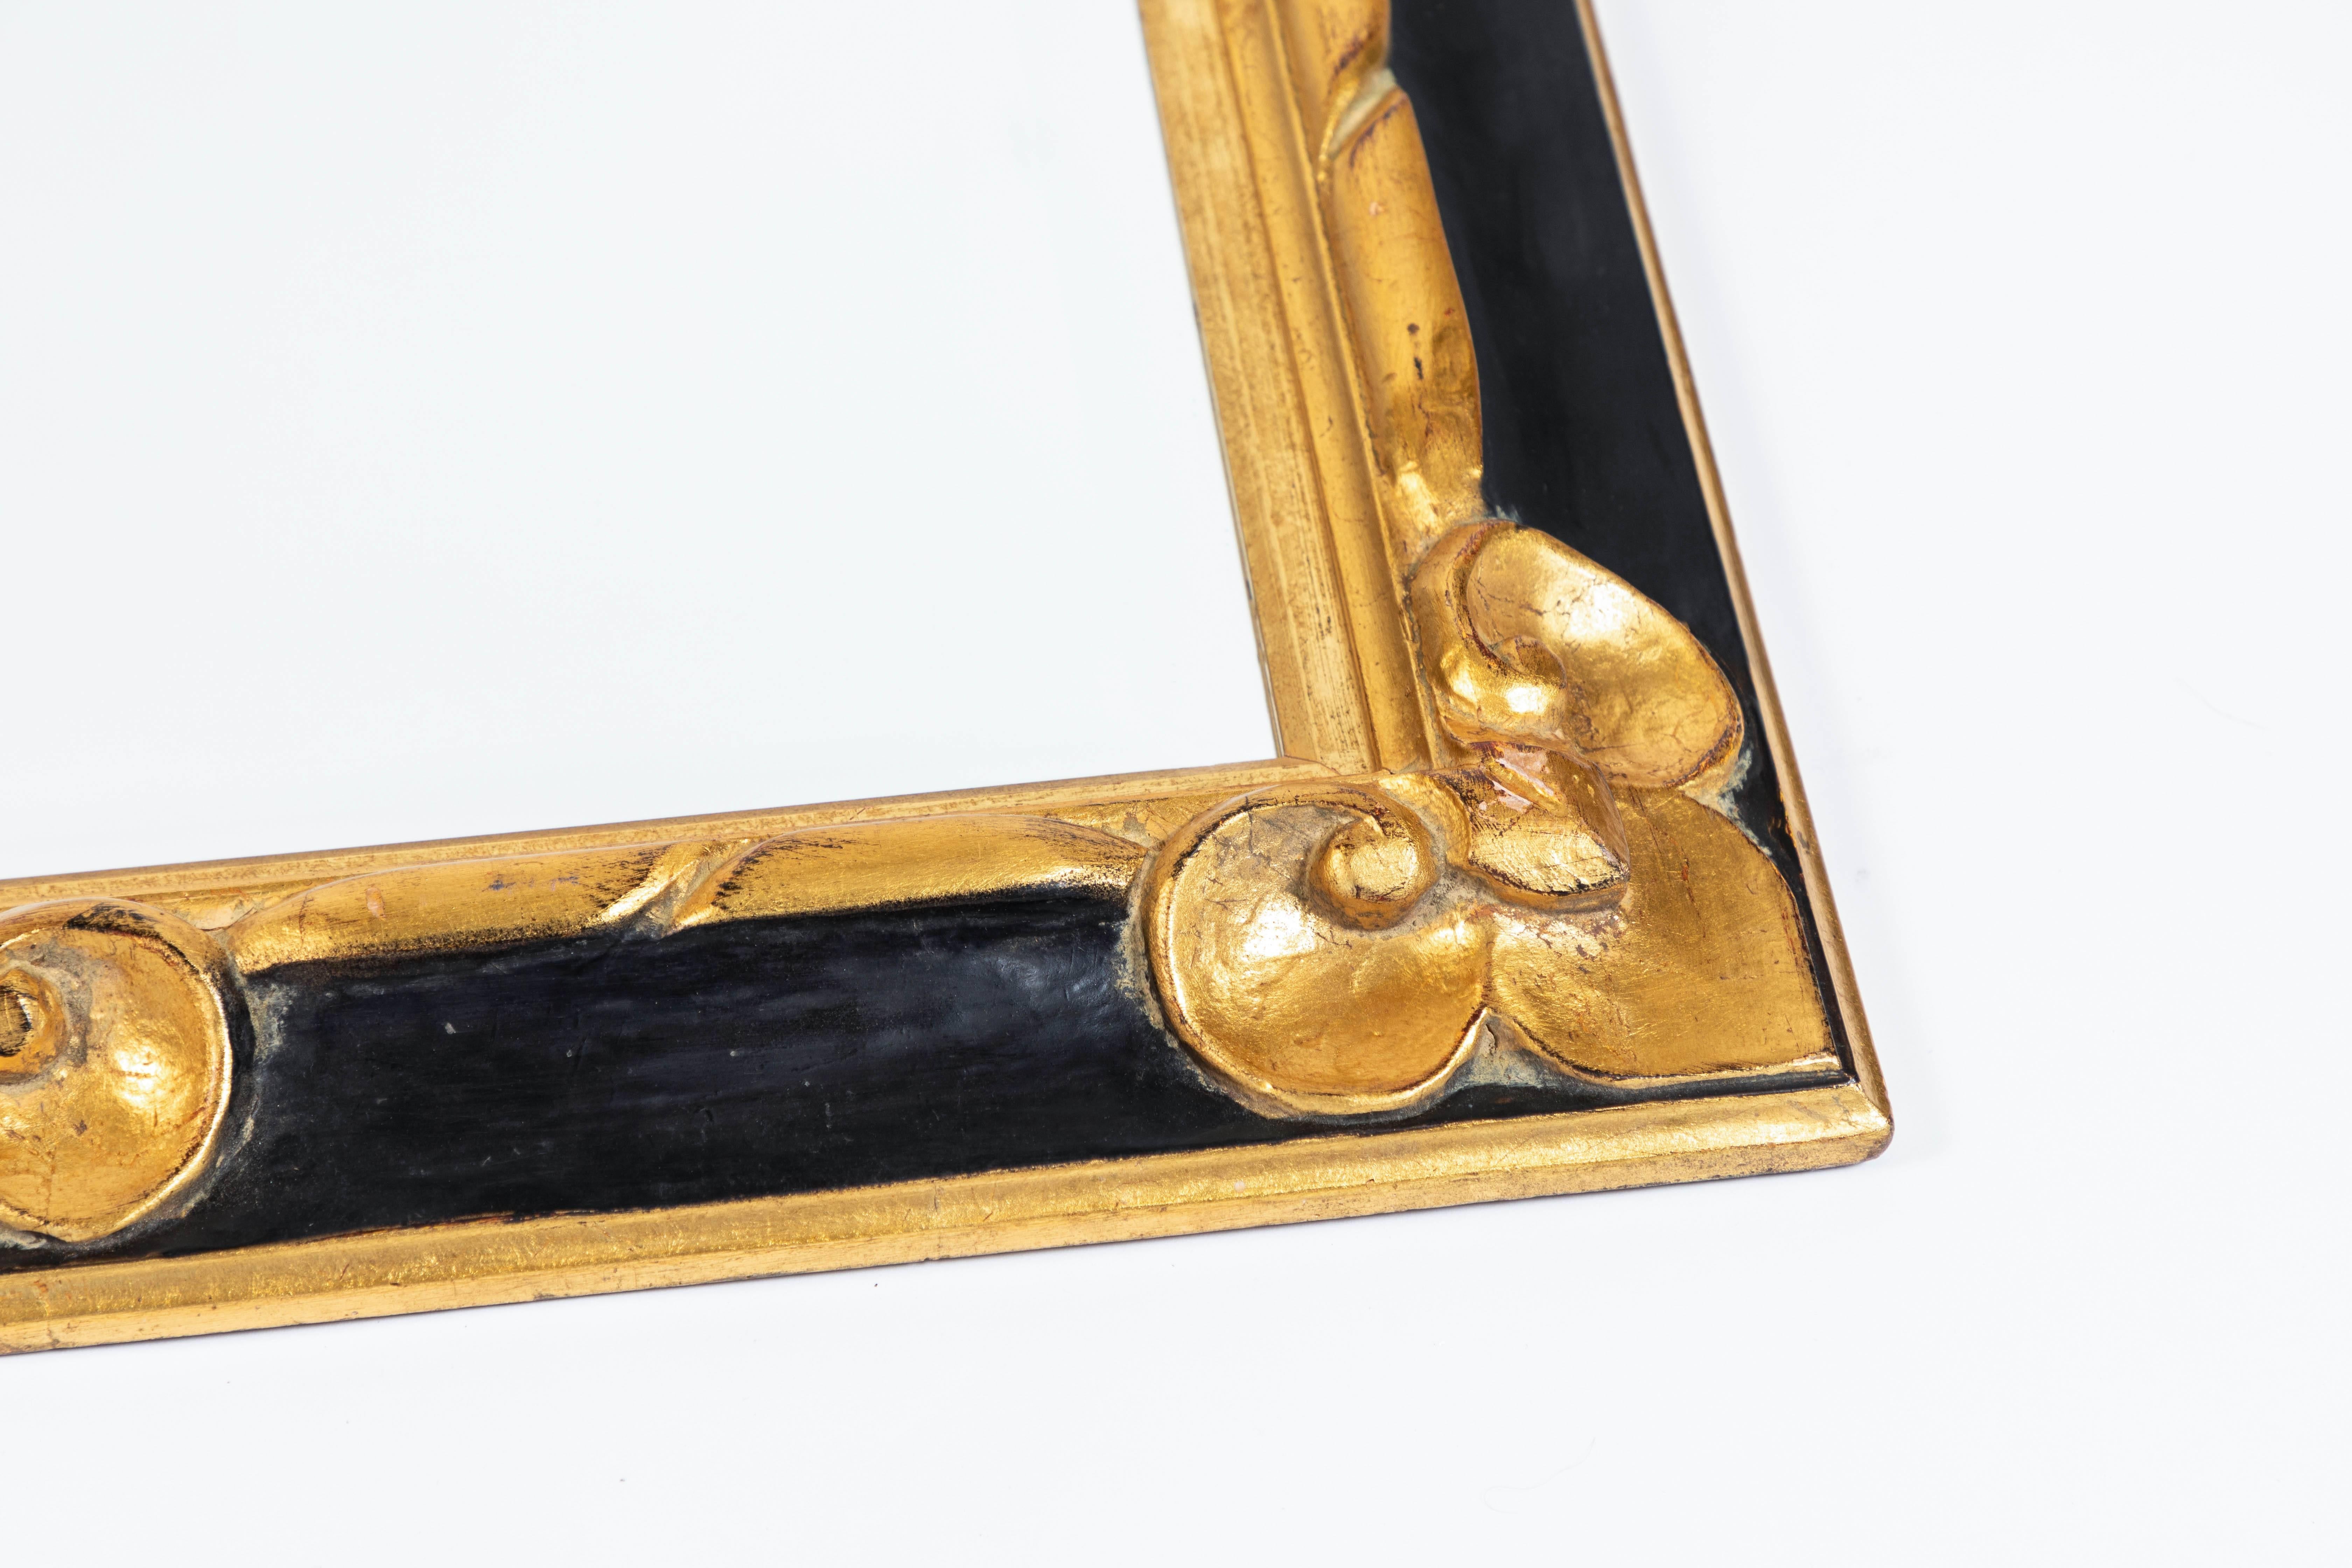 black and gold antique mirror